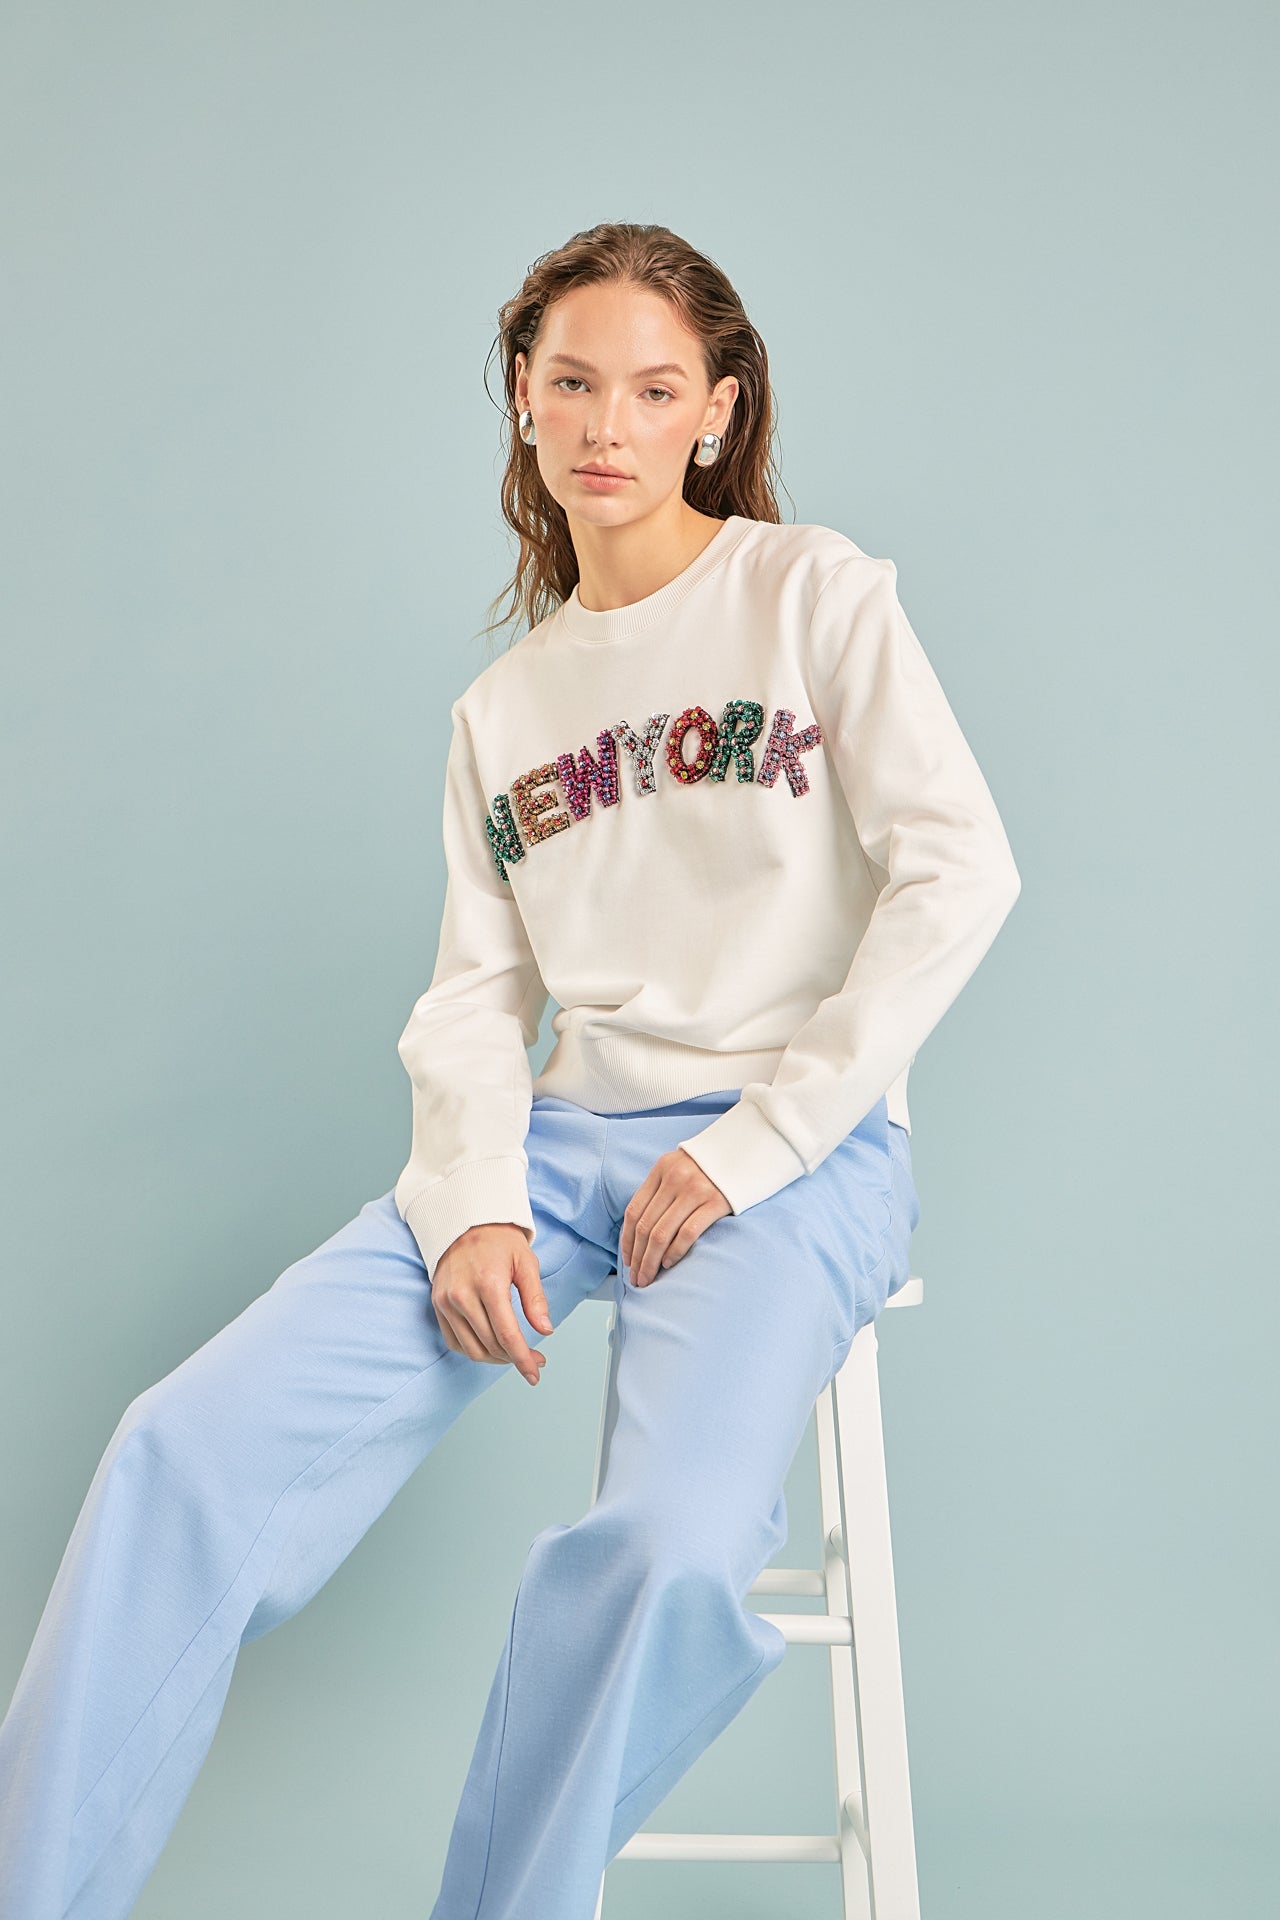 Shop the New York Embellished Sweatshirt from Endless Rose